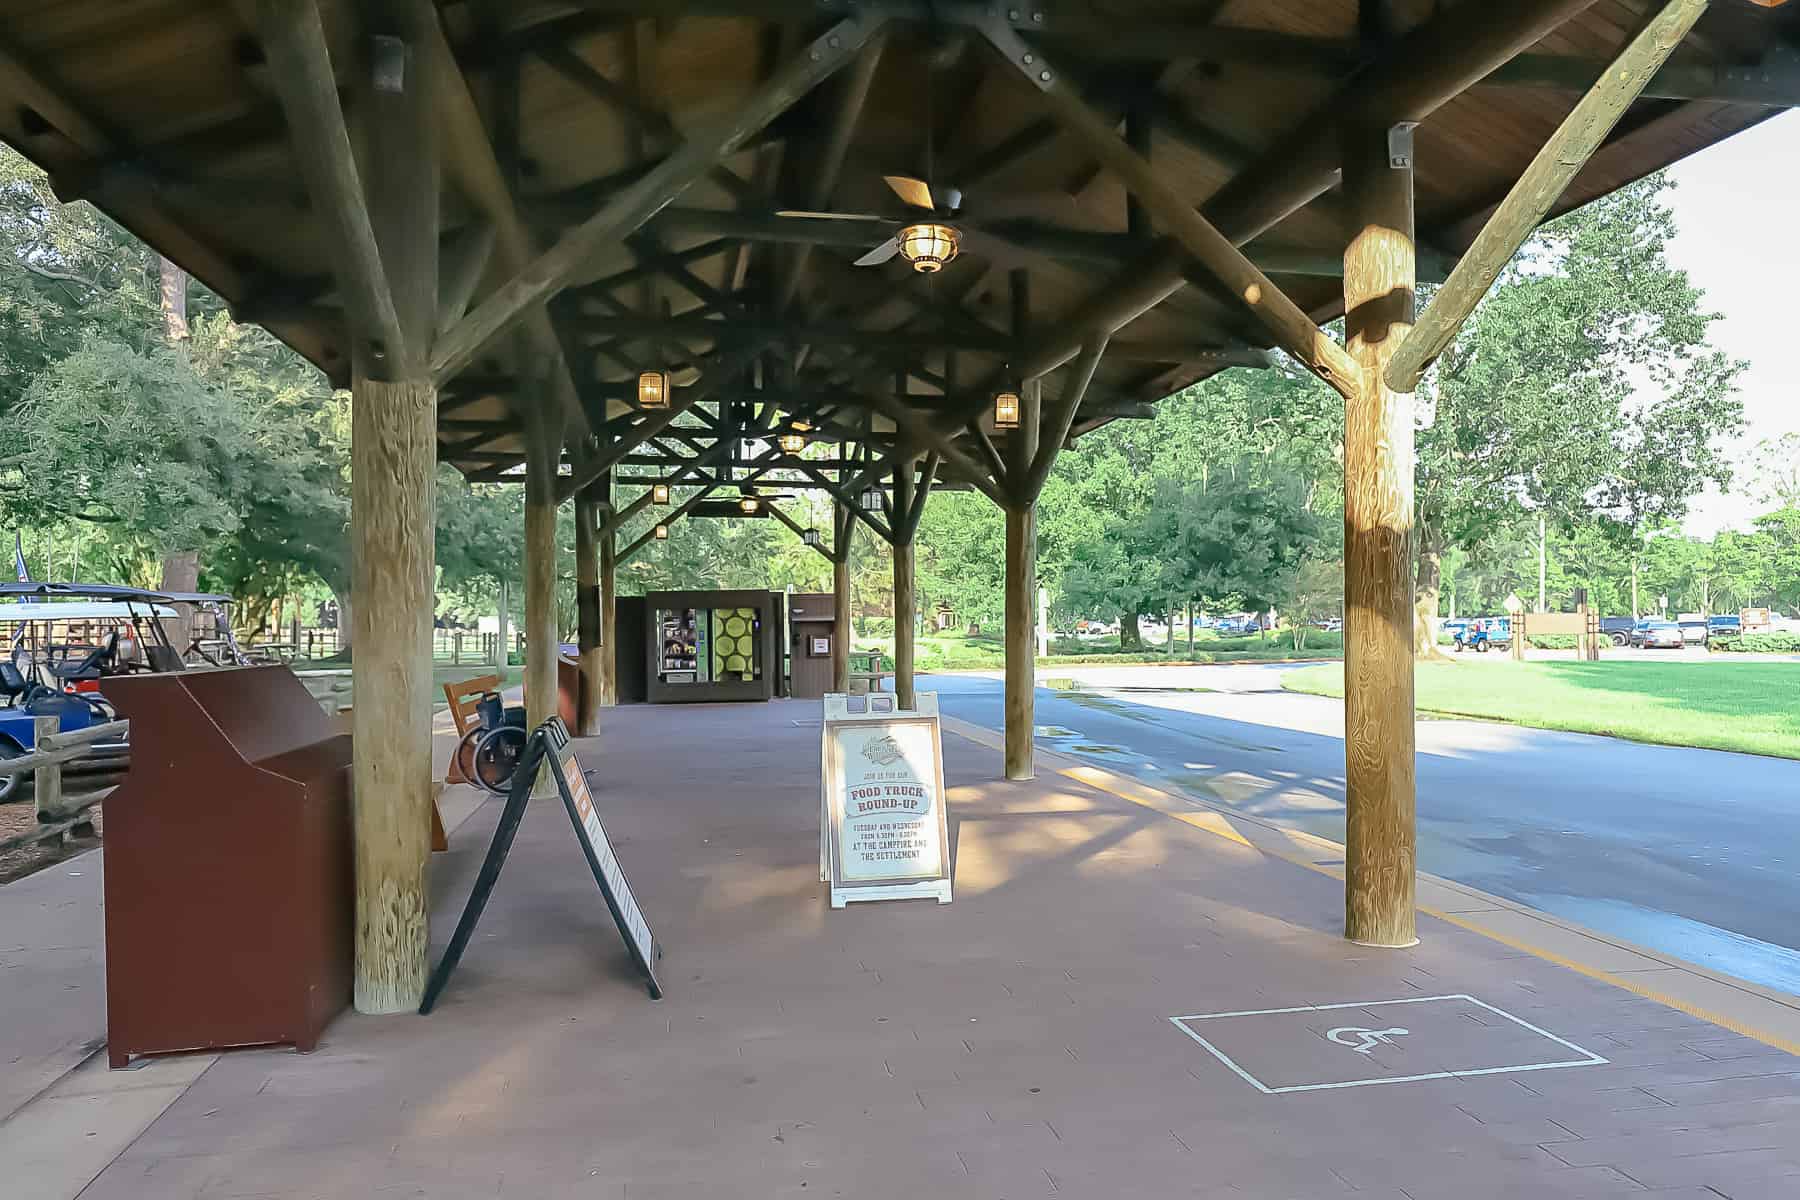 The primary bus stop at Disney's Fort Wilderness.